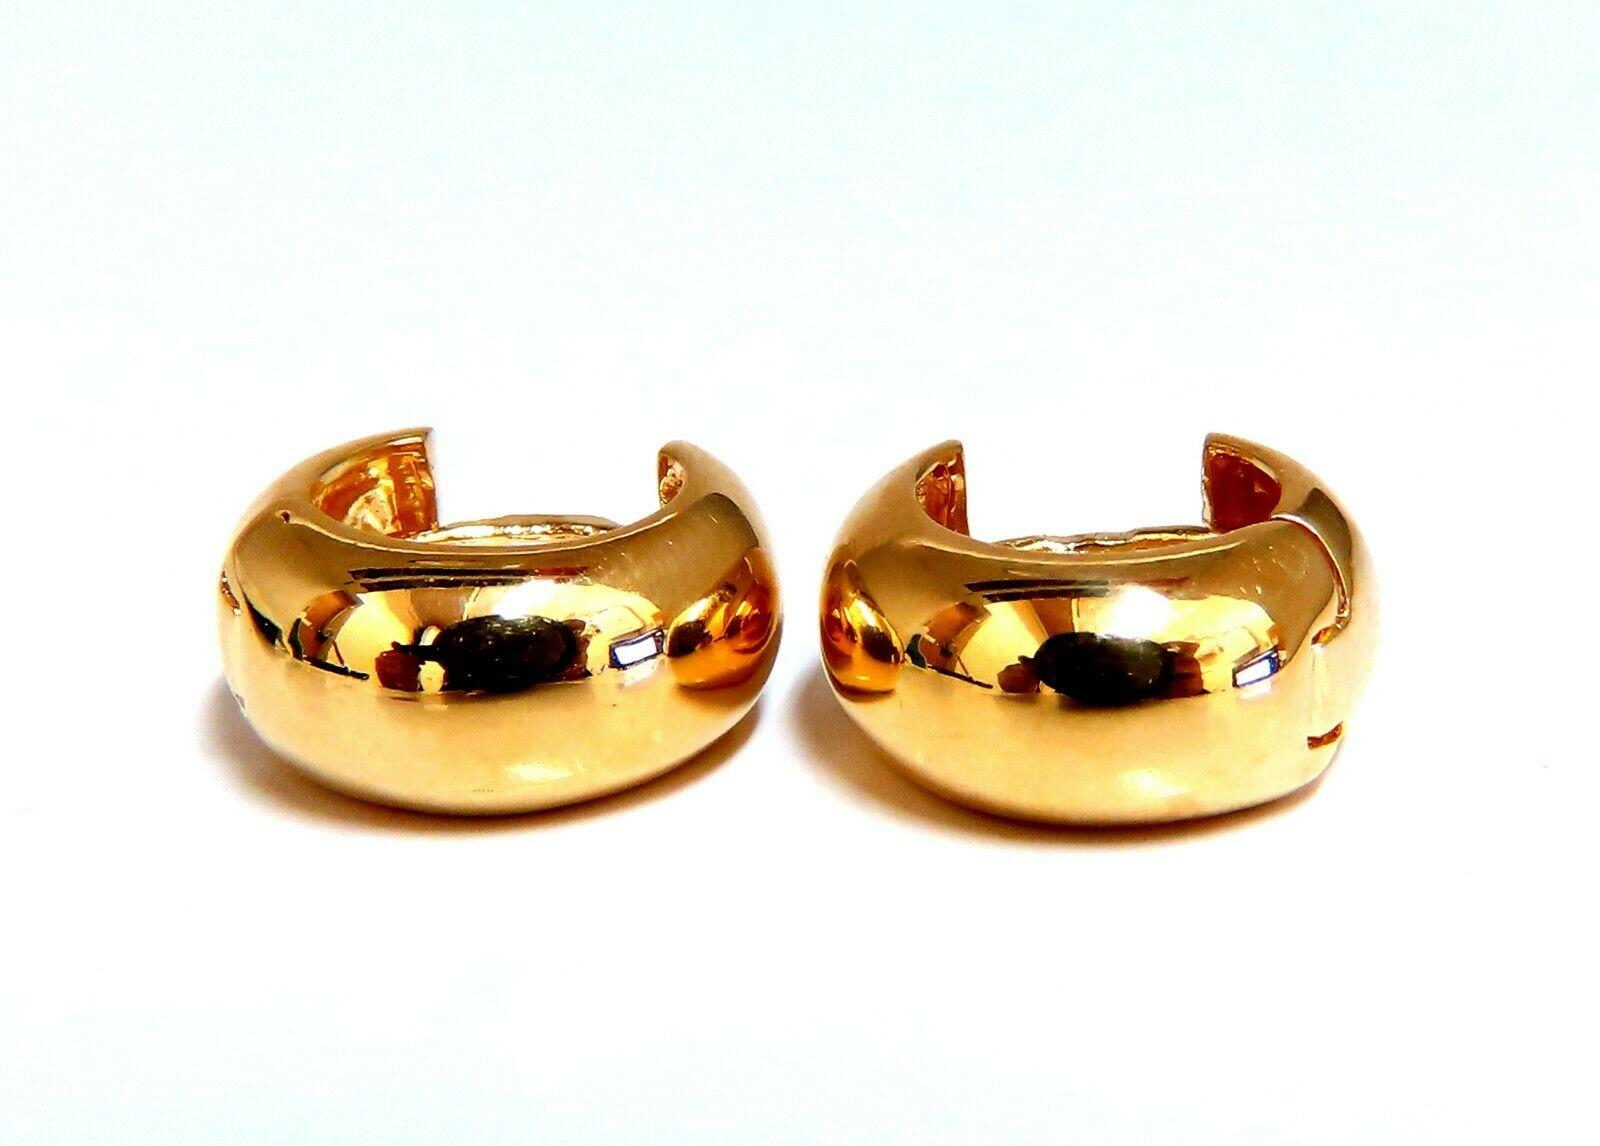 Classic Gold Huggie Snap Hoop Earrings

Measurements of Earrings:

15mm (Front to back)

7.5mm wide.

6.7 grams / 16kt. yellow gold

Earrings are gorgeous made